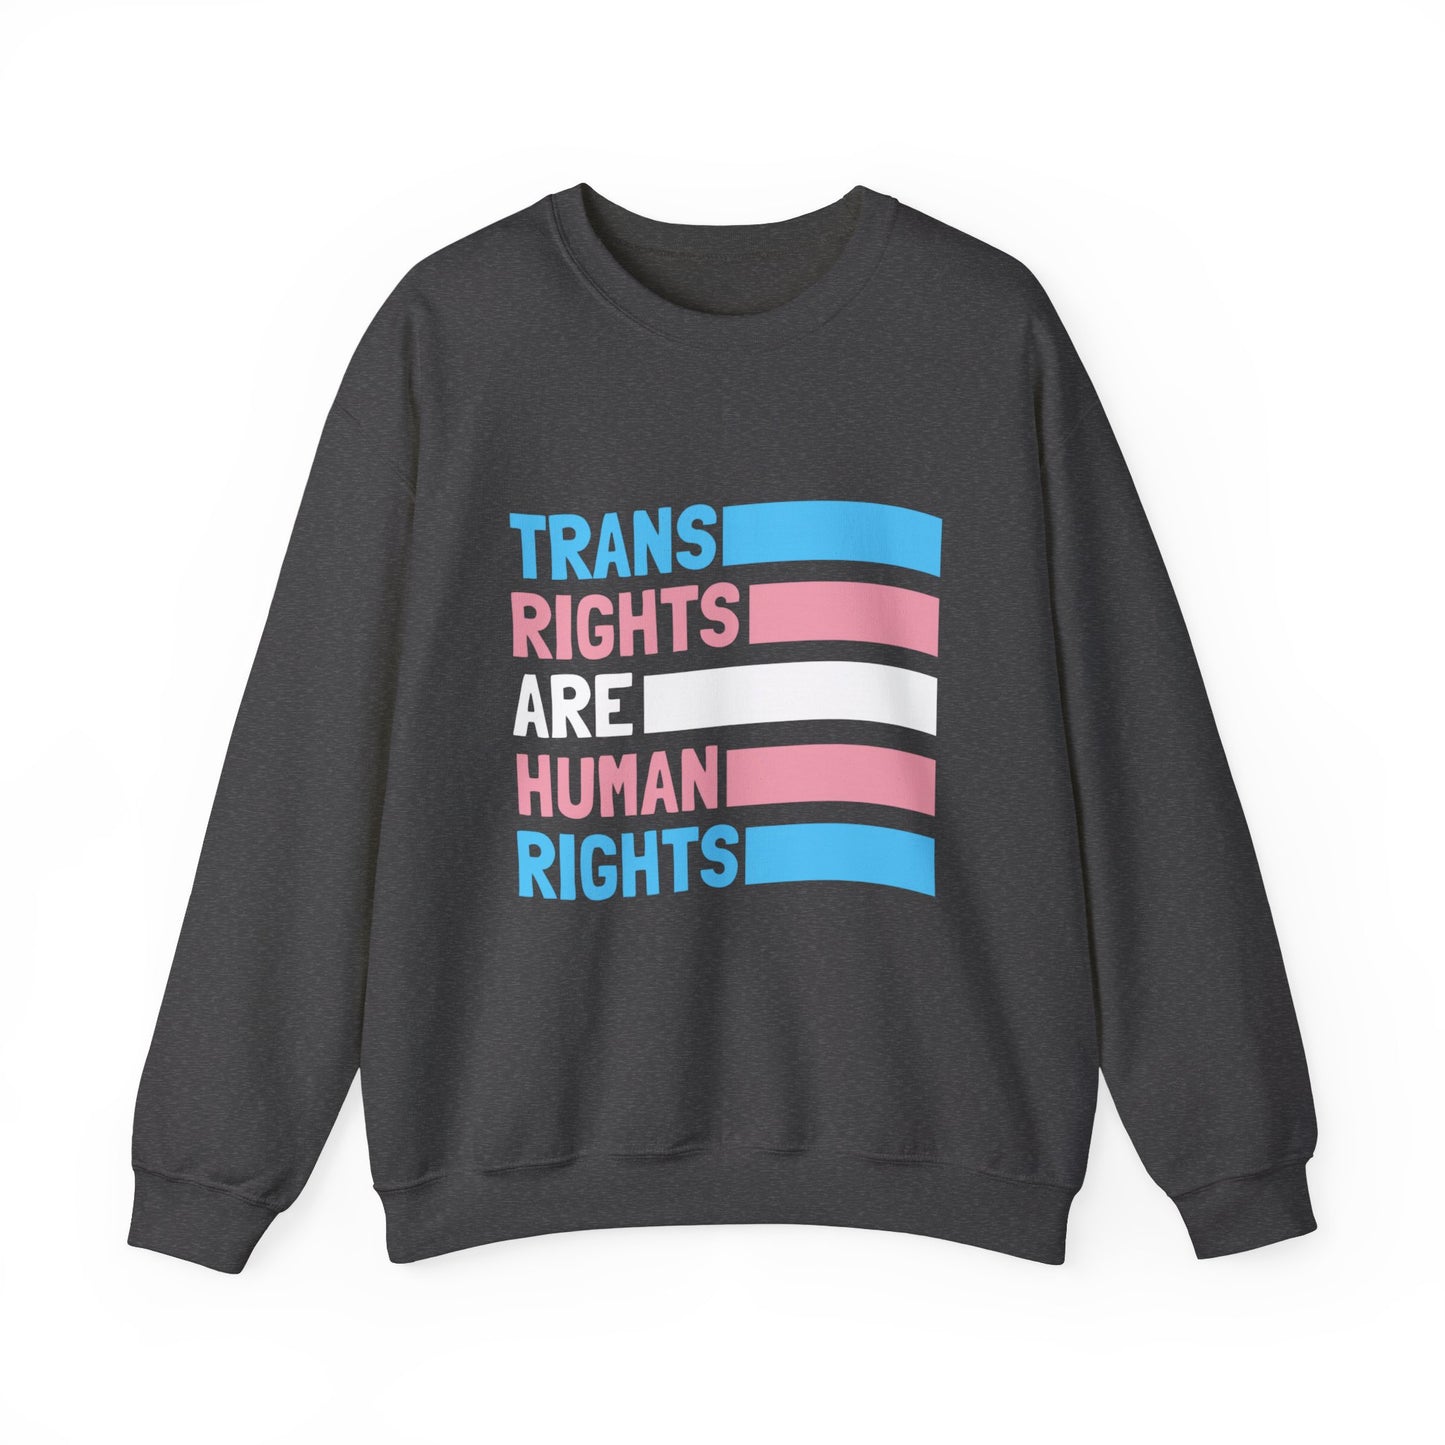 “Trans Rights Are Human Rights” Unisex Sweatshirt